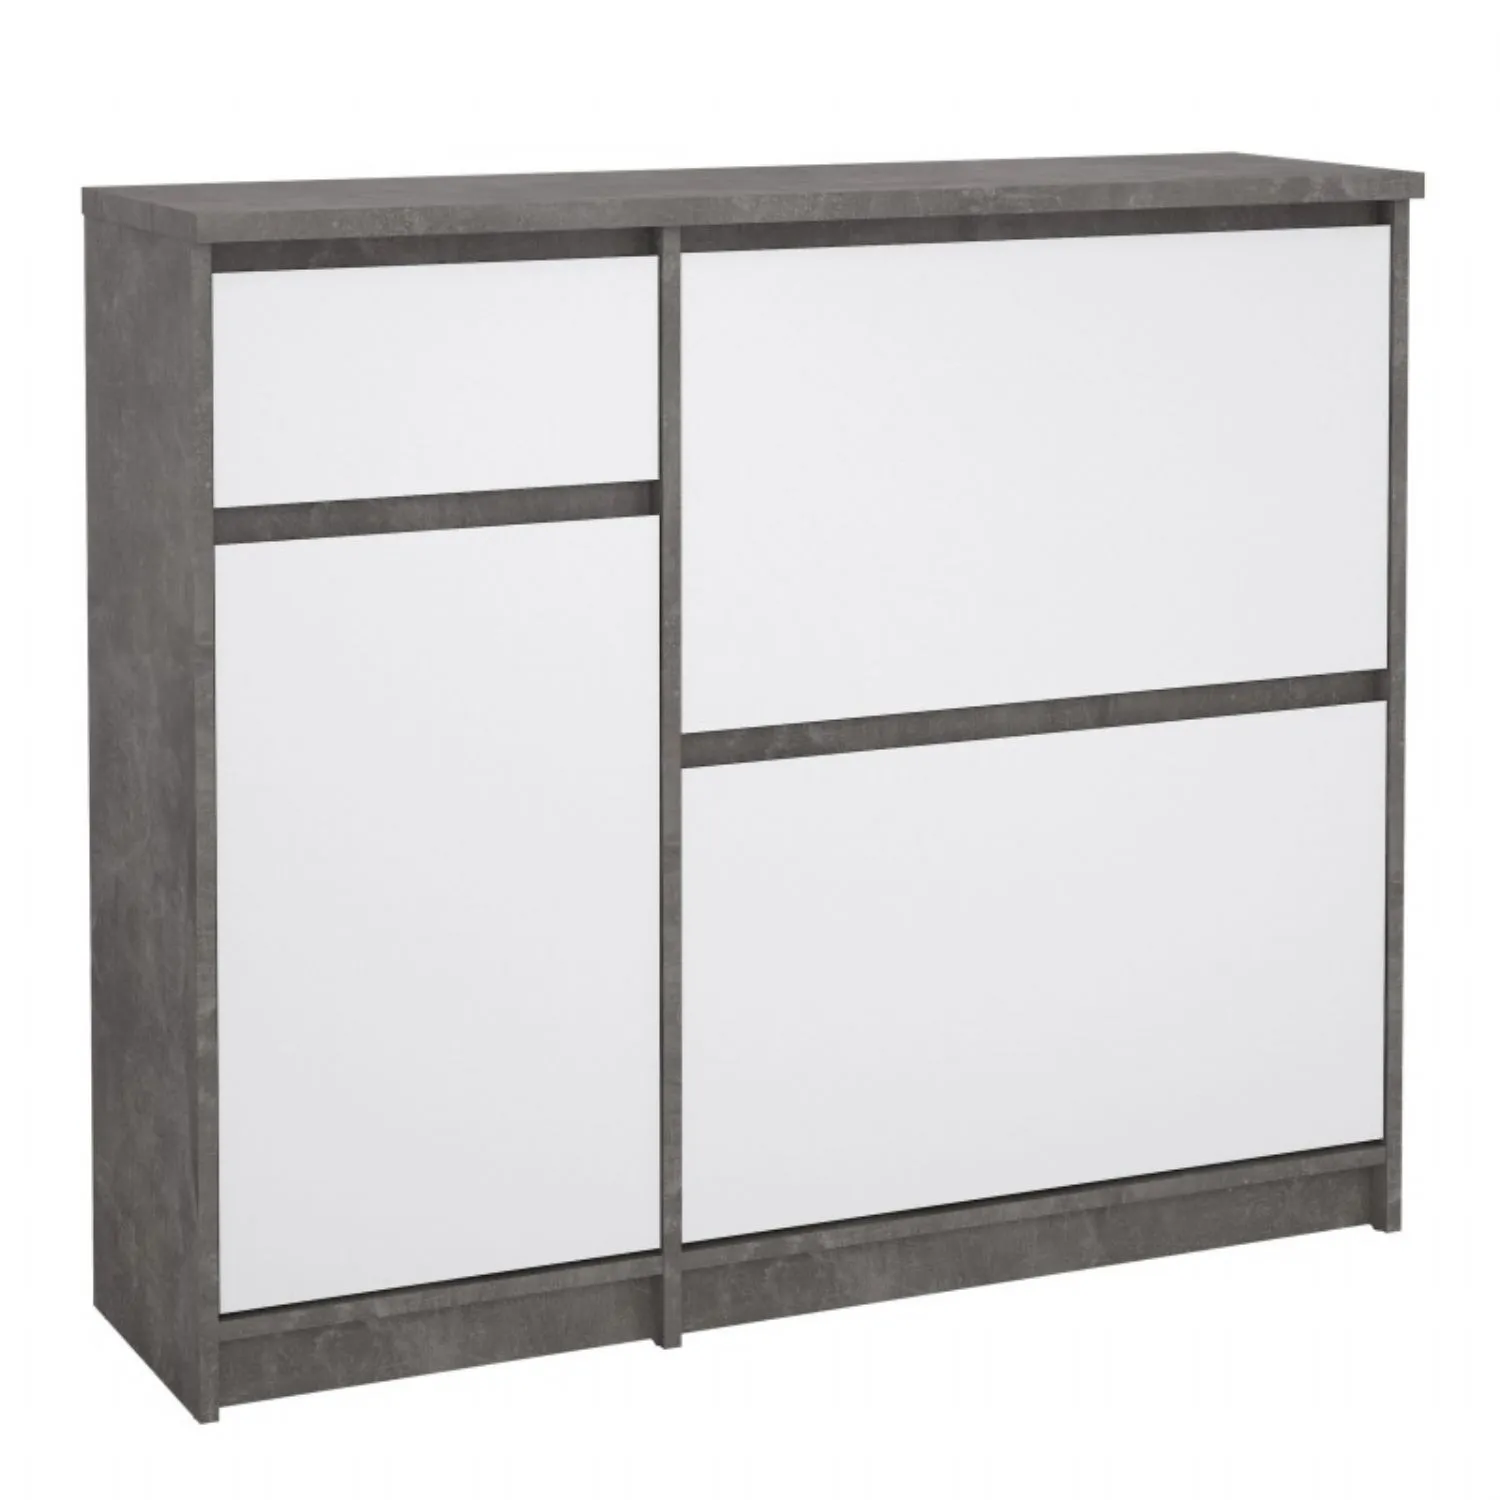 Shoe Cabinet with 2 Shoe Compartments, 1 Door and 1 Drawer in Concrete and White High Gloss